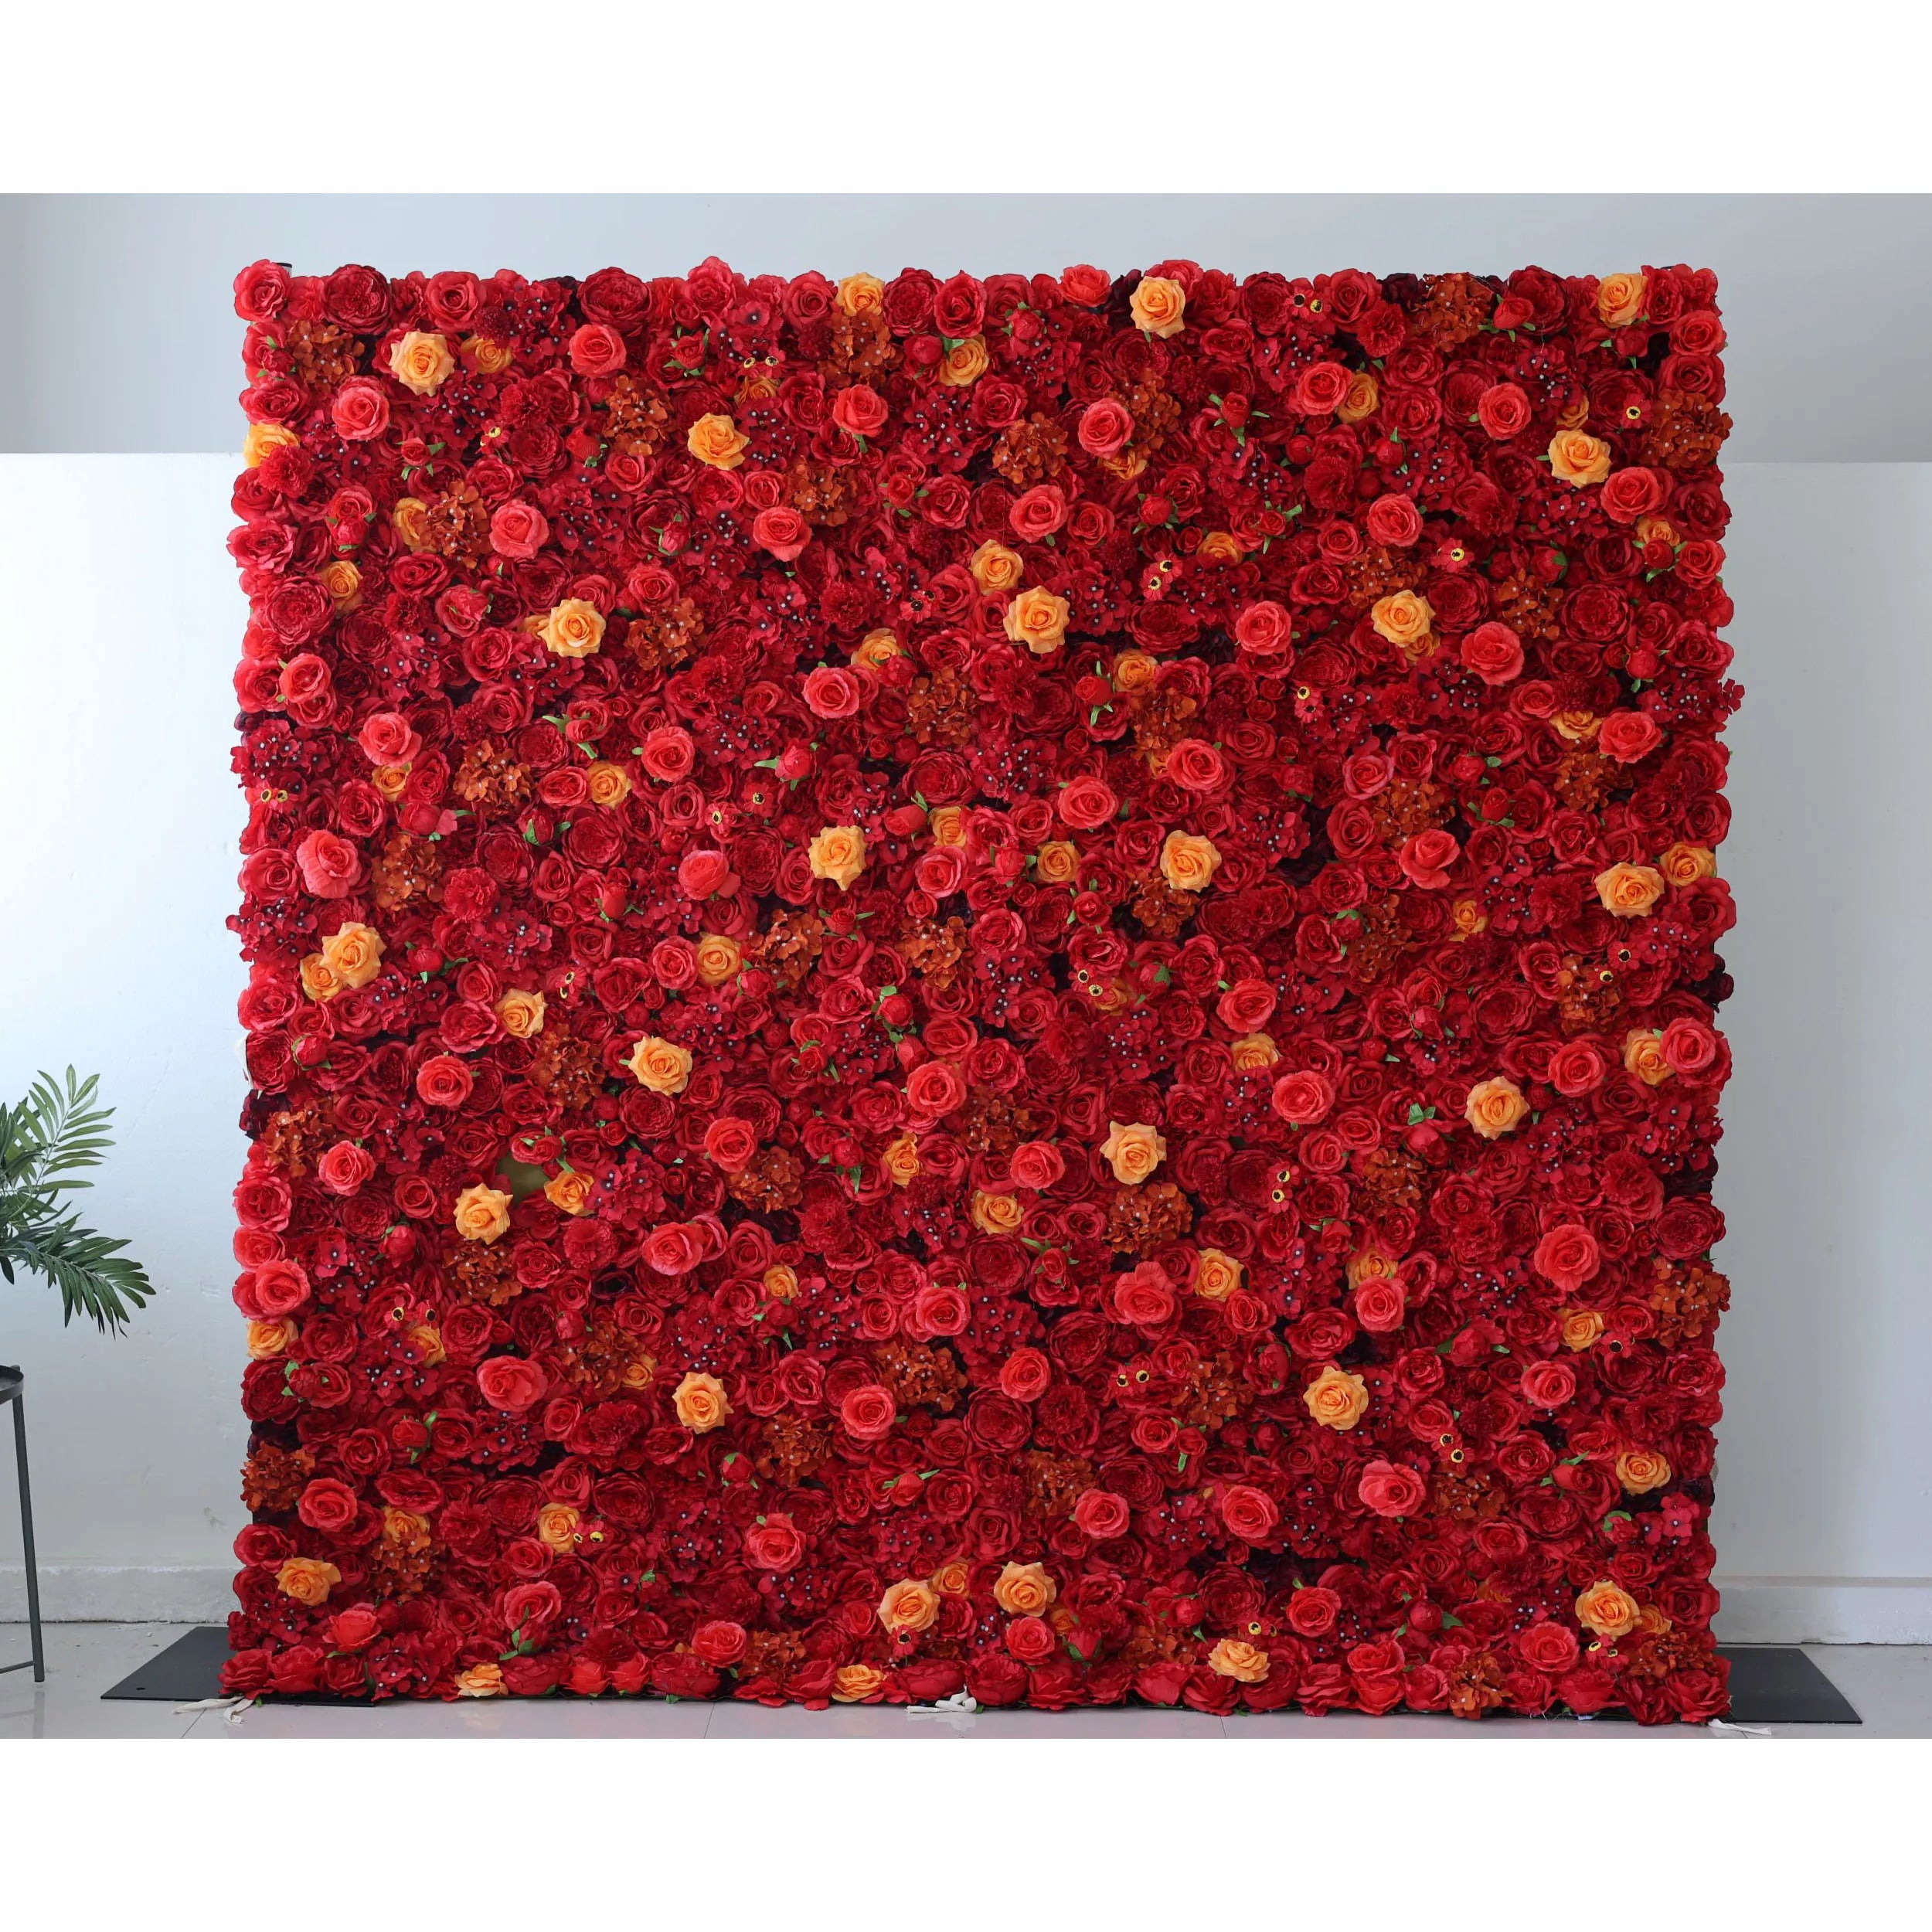 ValarFlowers Backdrop: Dive into Radiant Red Resplendence. A bold blend of reds with touches of gold. Ignite events with this lively, lush, and luxuriant floral fantasy.